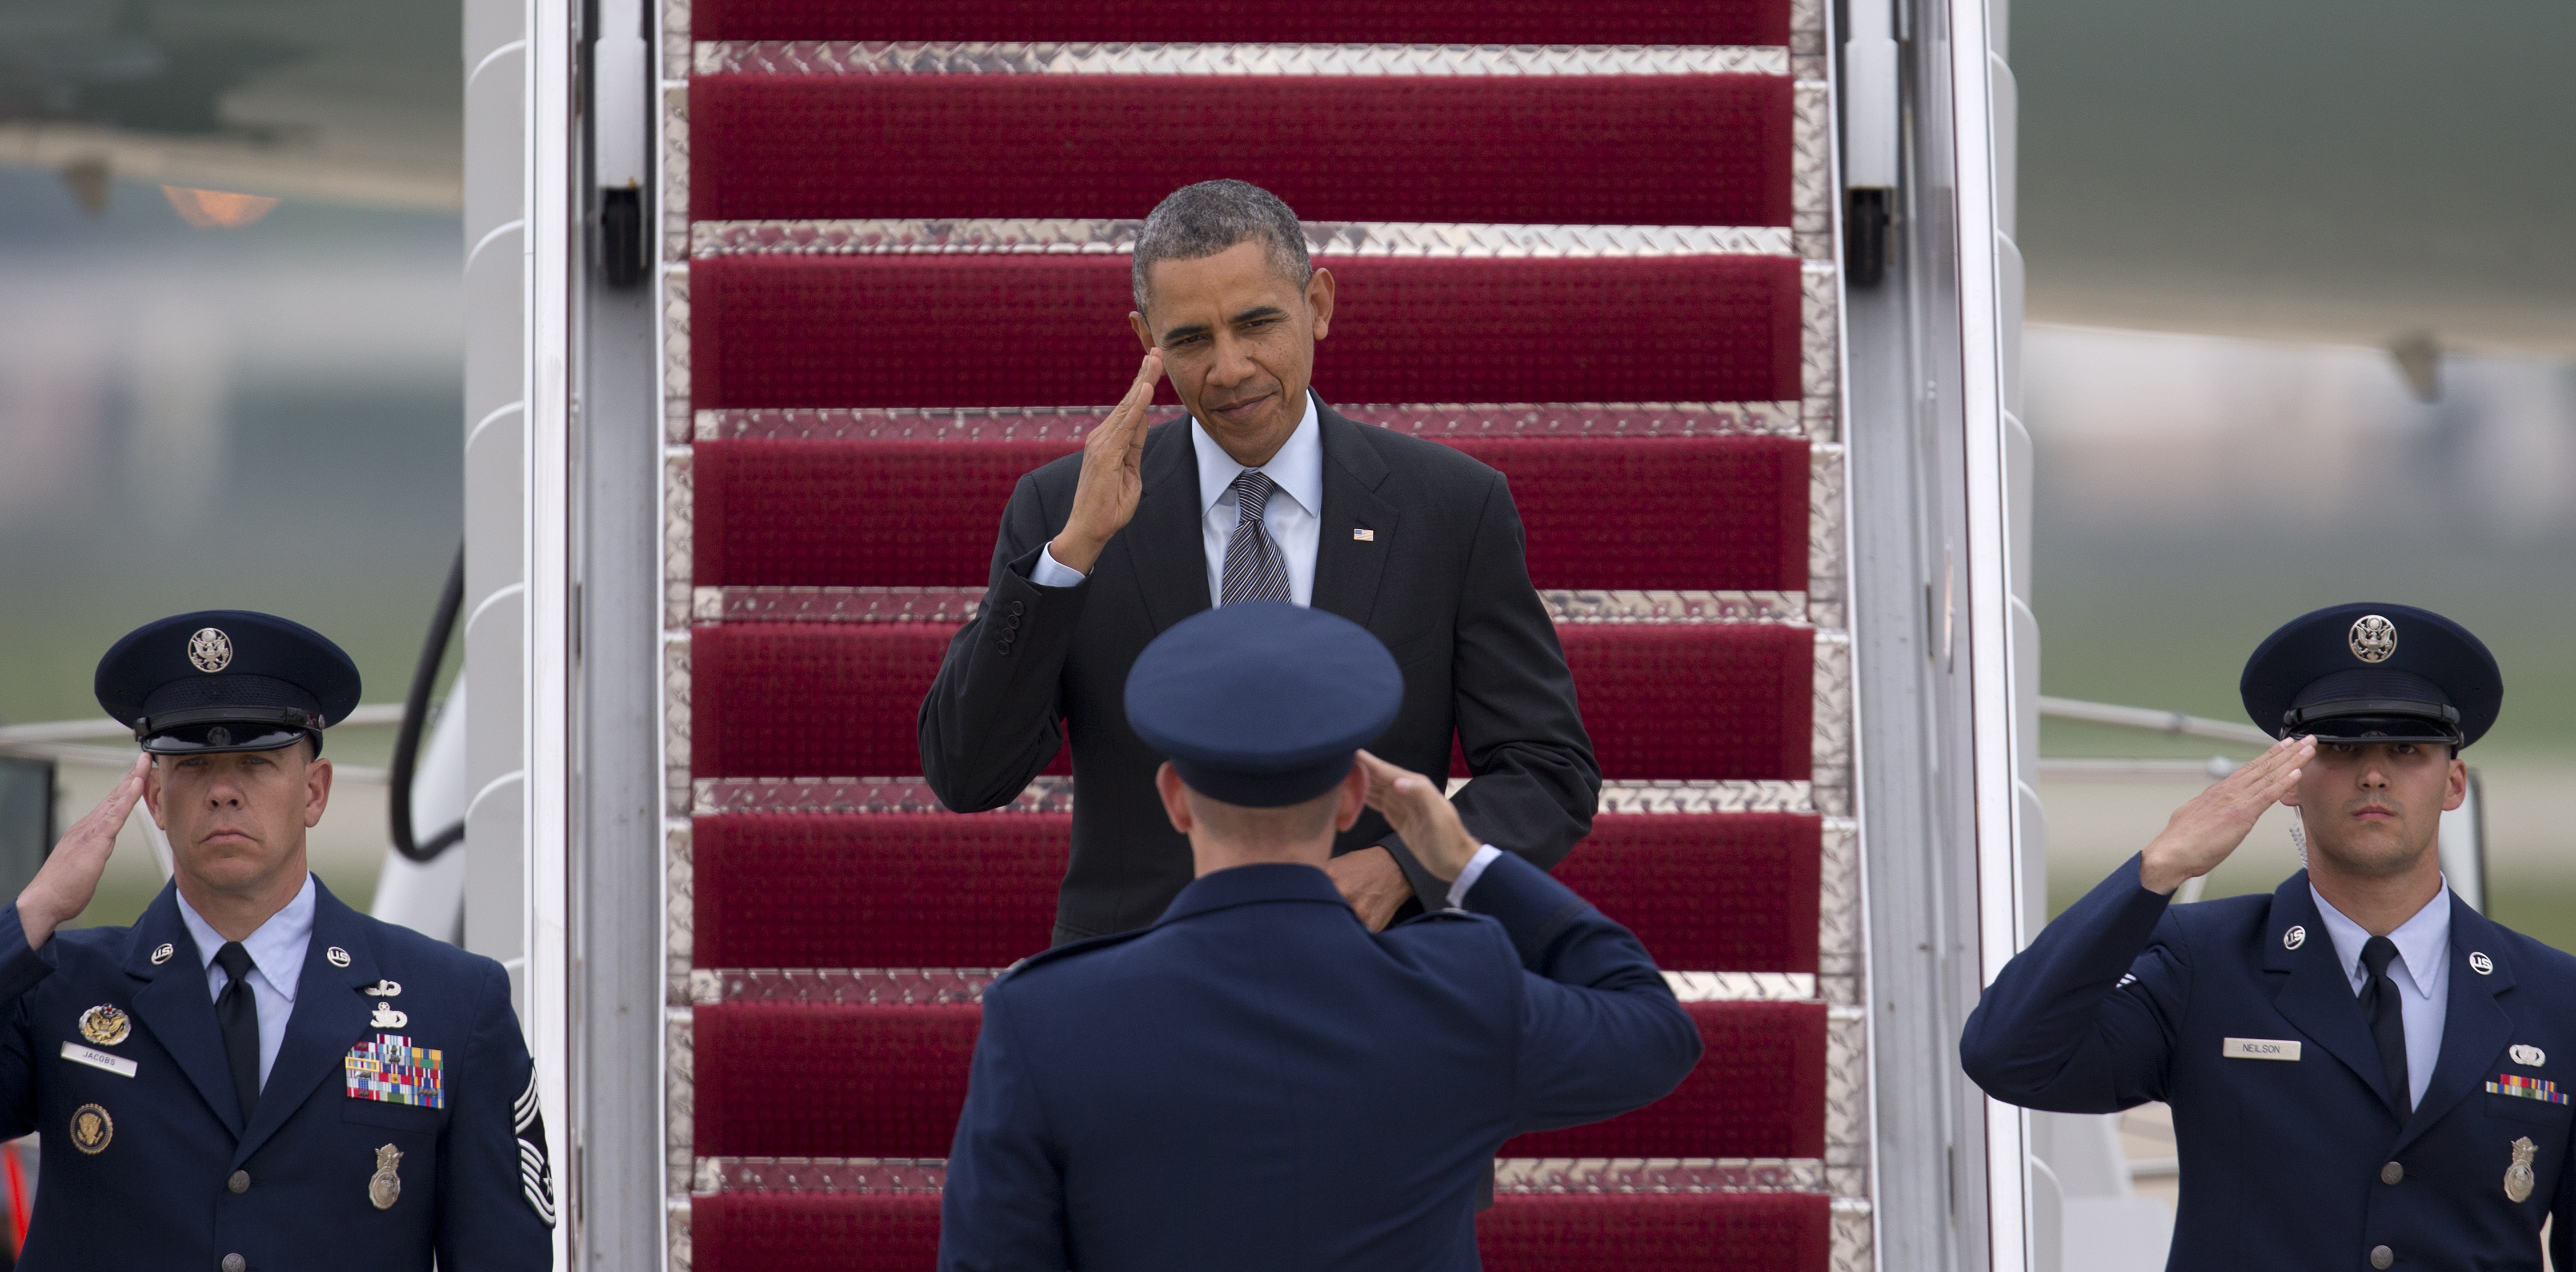 President Barack Obama returns a salute from Col. William M. Knight as he steps off of Air Force One in Andrews Air Force Base, Md, May 9, 2014. (Carolyn Kaster—AP)